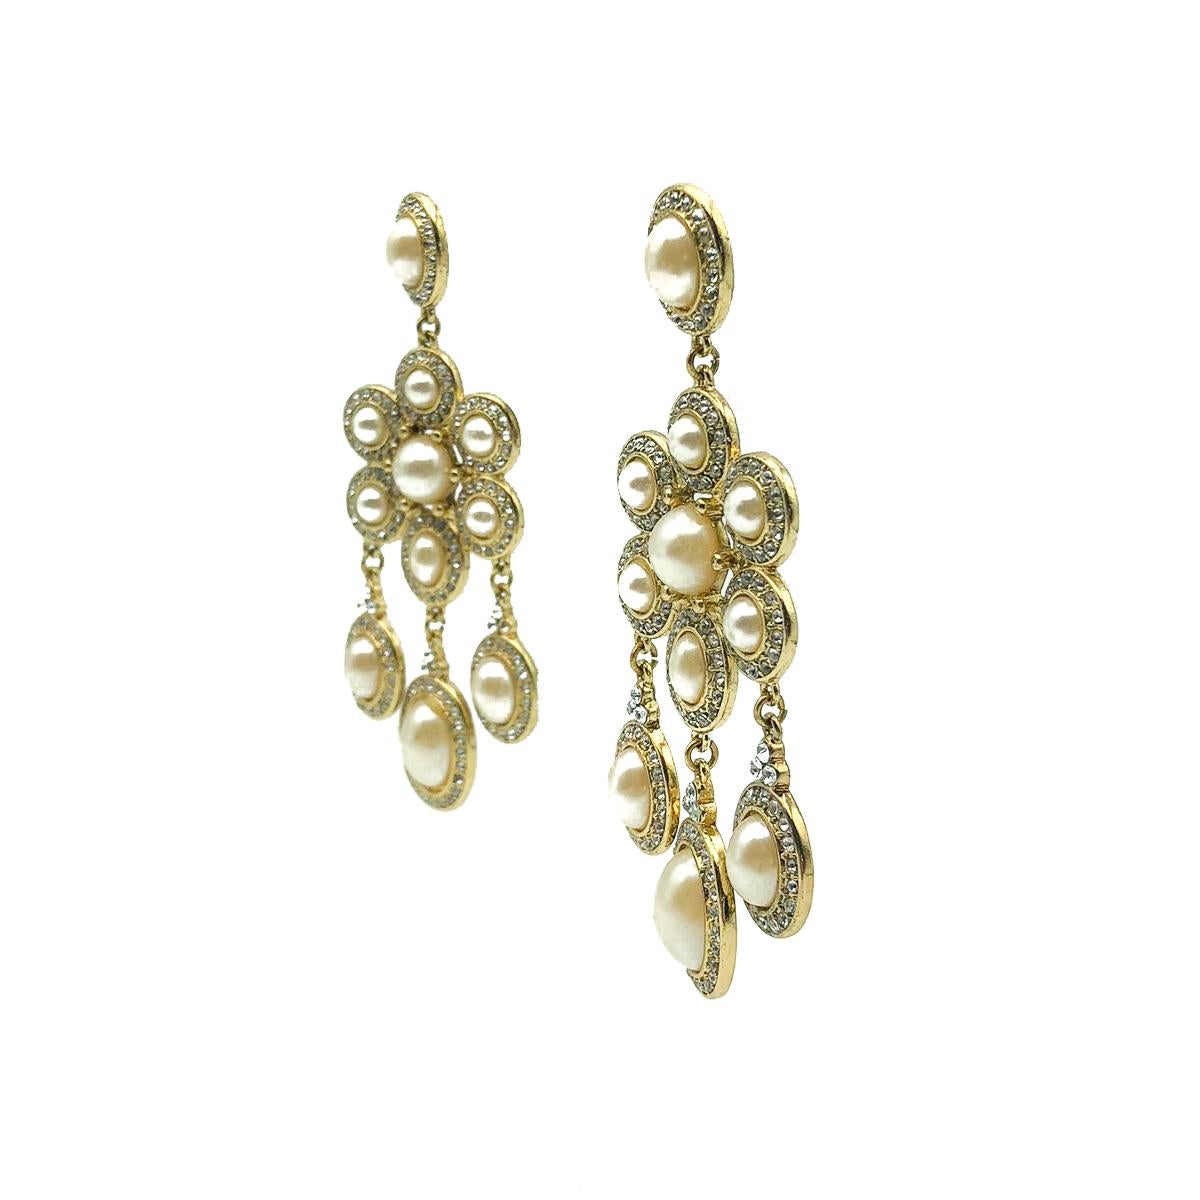 A truly stunning pair of preloved Monet Cascade Earrings. Featuring crystals and lustrous pearls set in a girandole style design; originally the height of fashion in Georgian society. Crafted in gold tone metal with glass crystals and faux pearls.